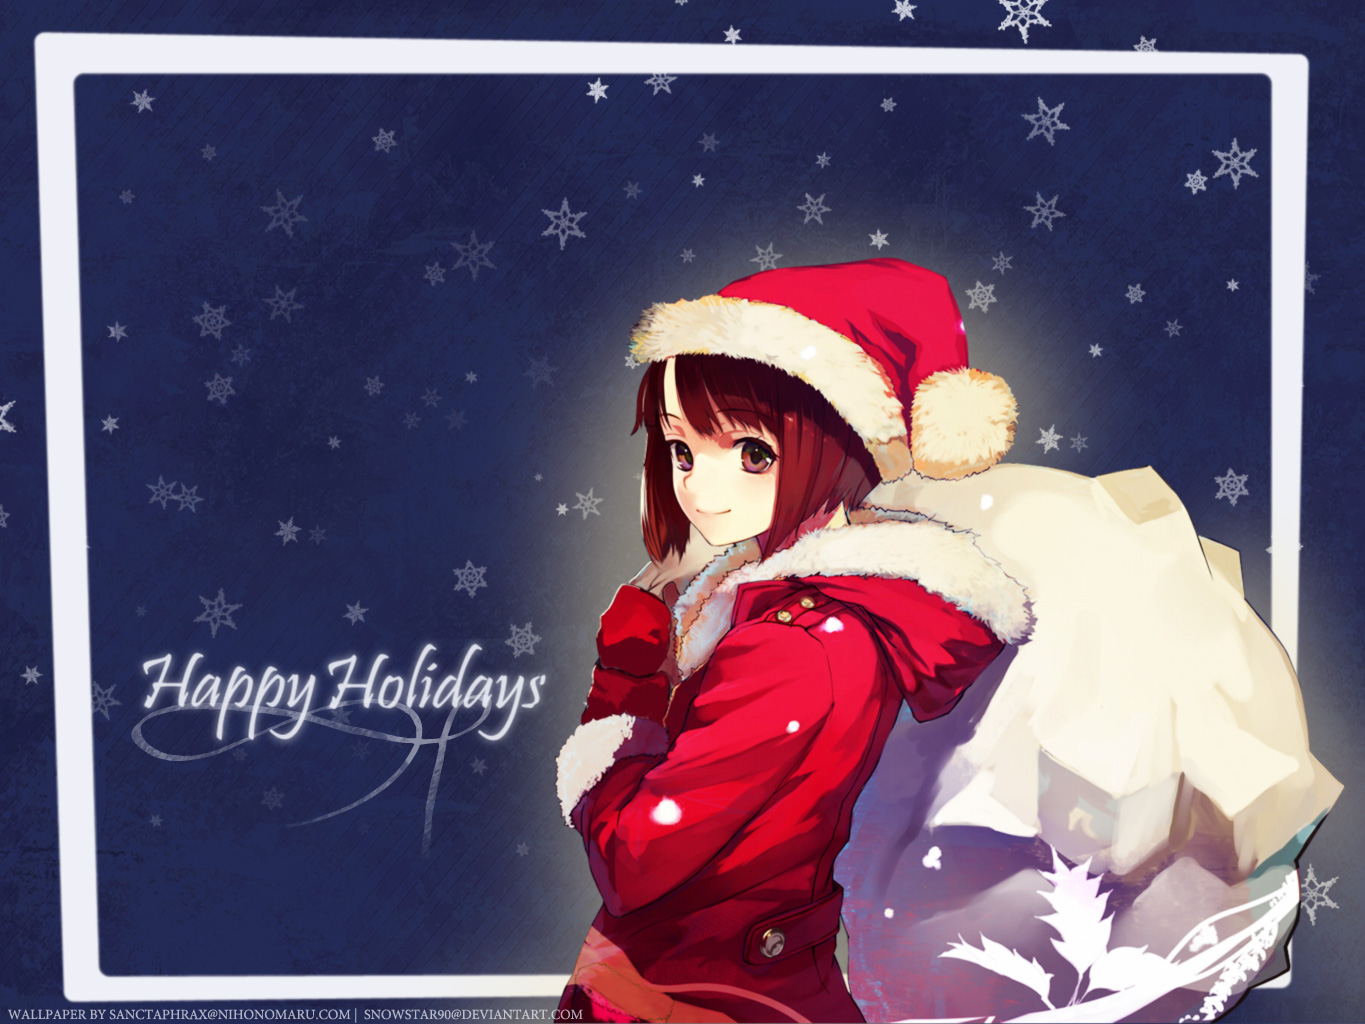 Merry christmas background Images - Search Images on Everypixel